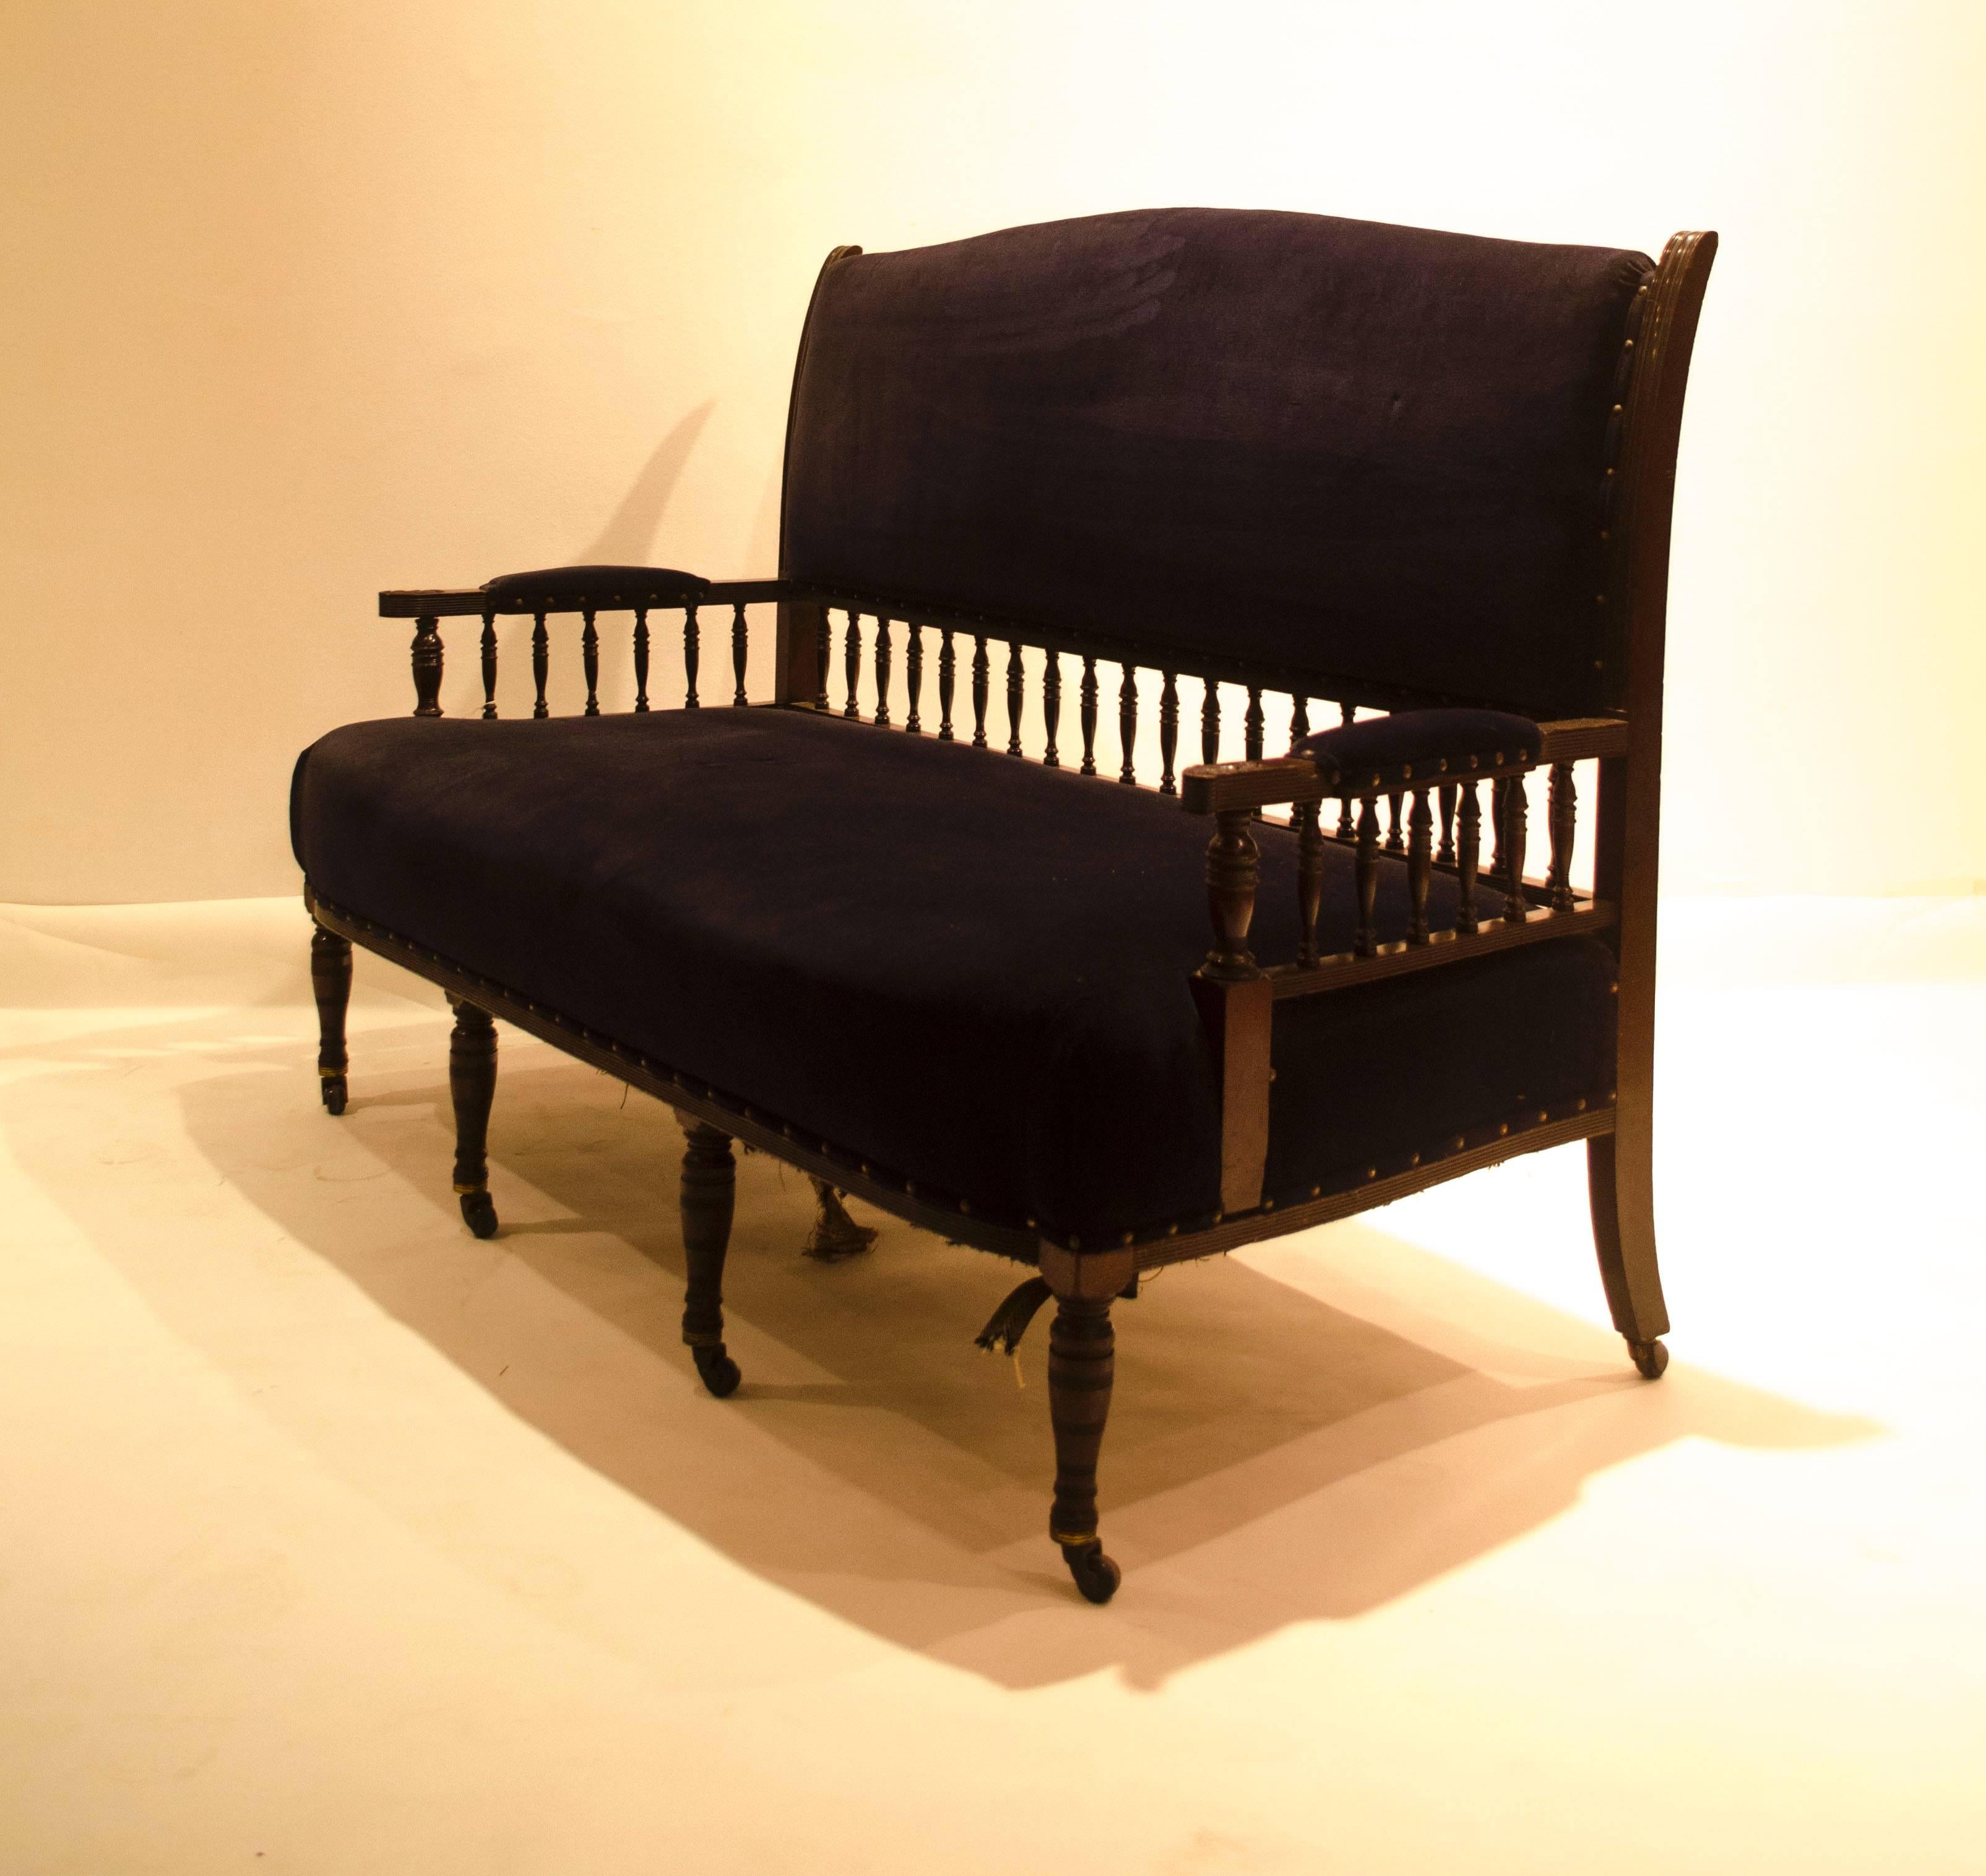 Collinson and lock, possibly designed by E. W. Godwin.
A fine Anglo-Japanese mahogany settee,  with subtle Japonesque detailing to the back uprights, each arm turns out in the Japanese style, with finely carved foliate details to the upper fronts